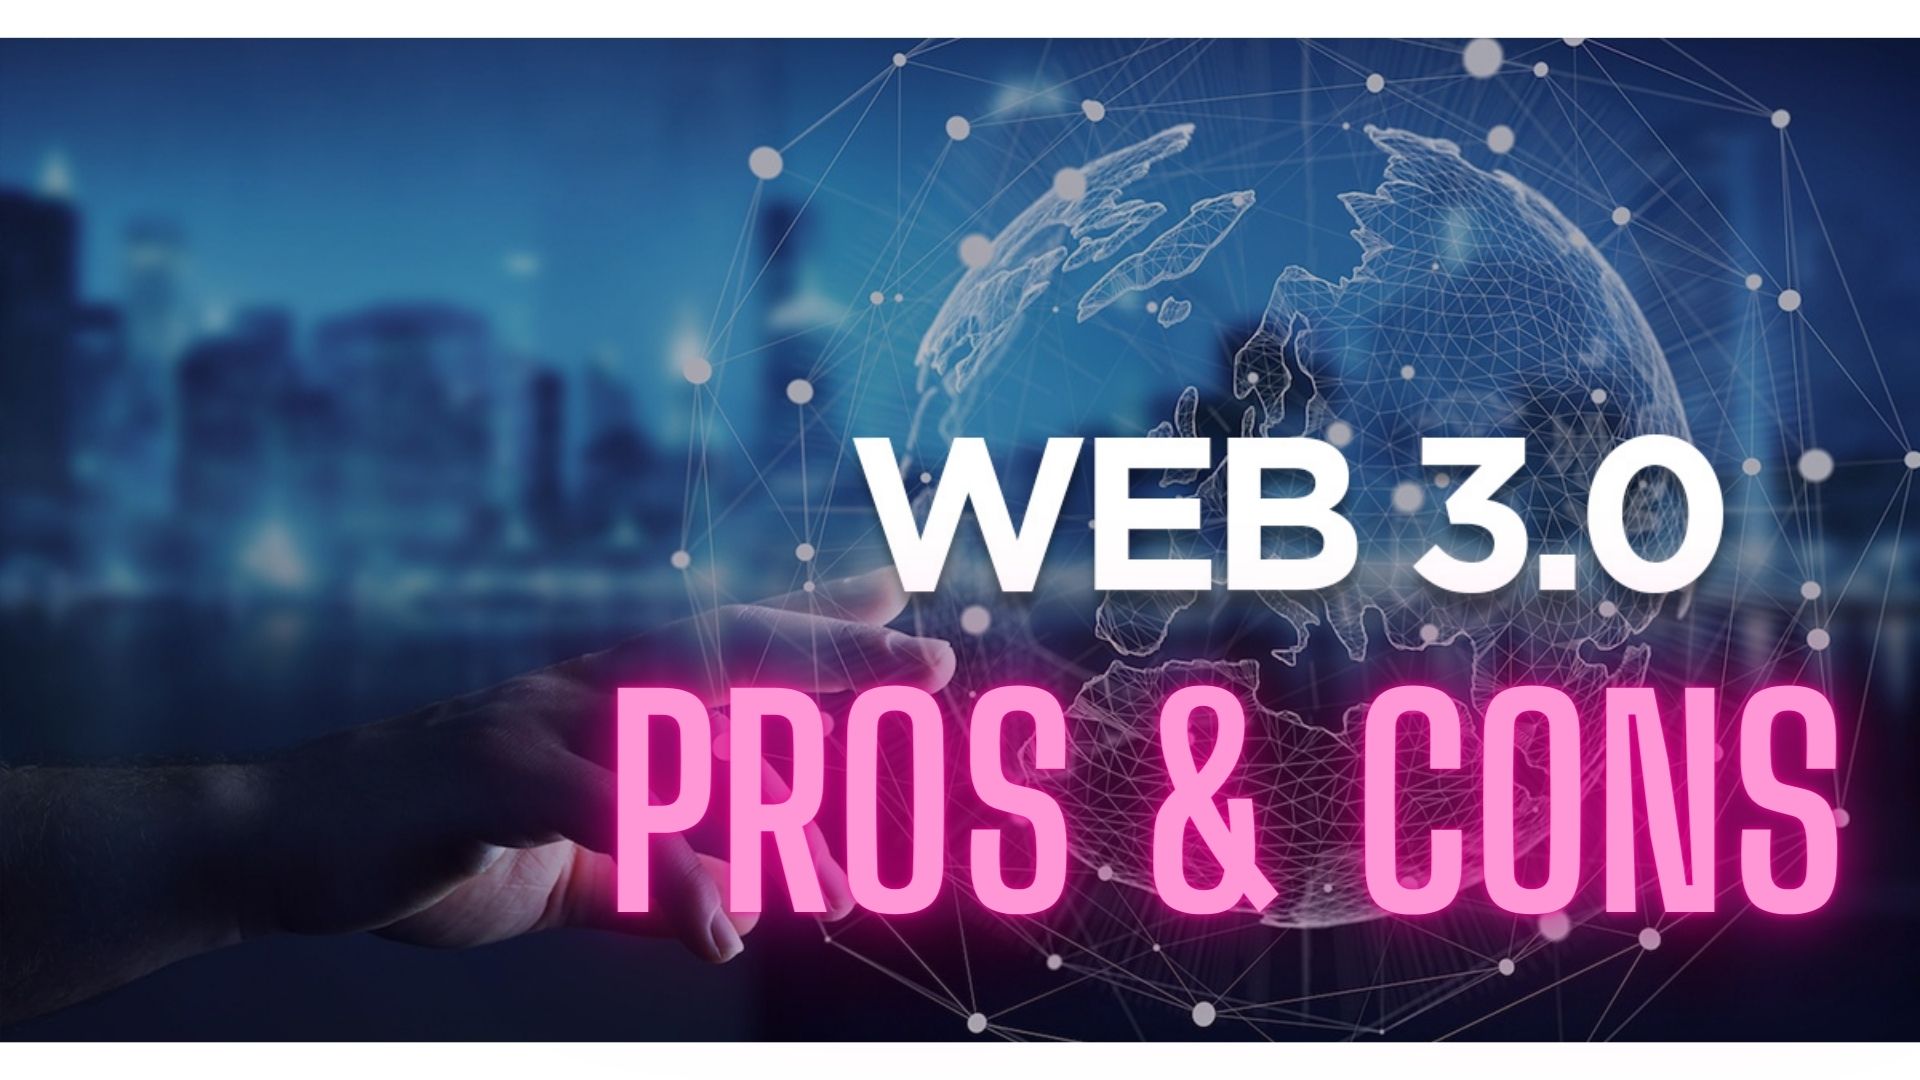 Features of web 3.0